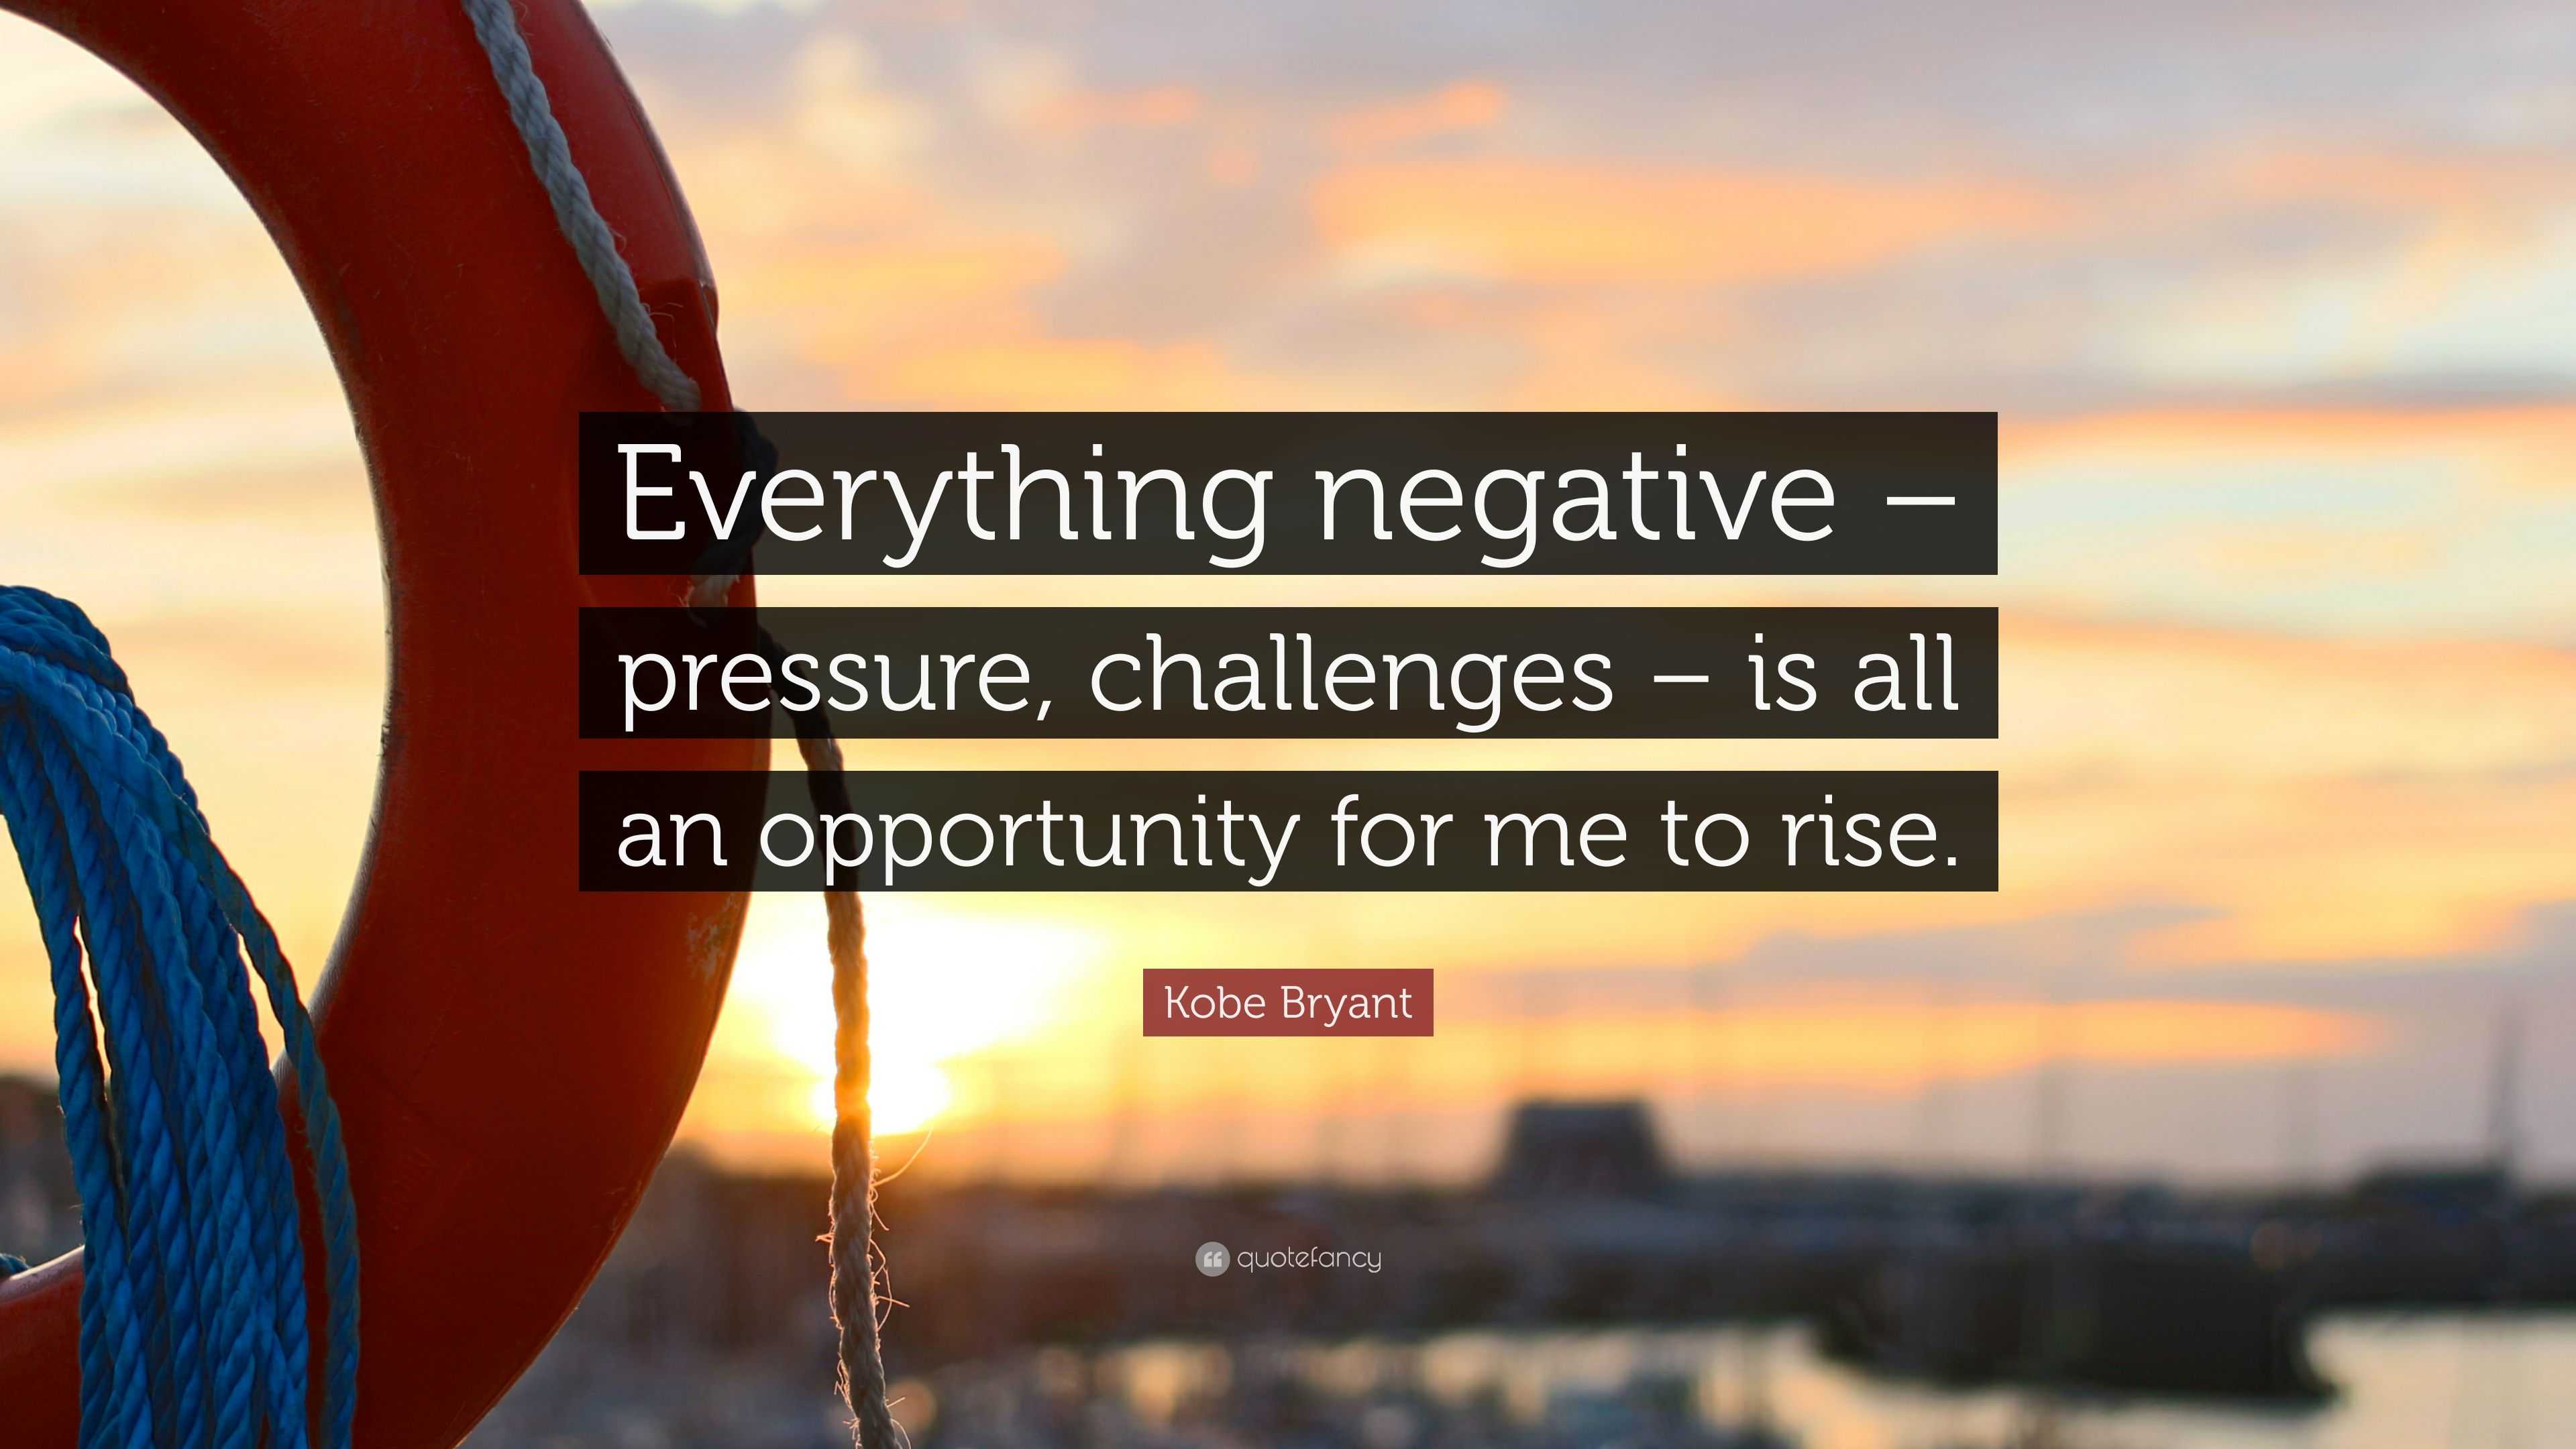 Kobe Bryant Quote: “Everything negative – pressure, challenges – is all